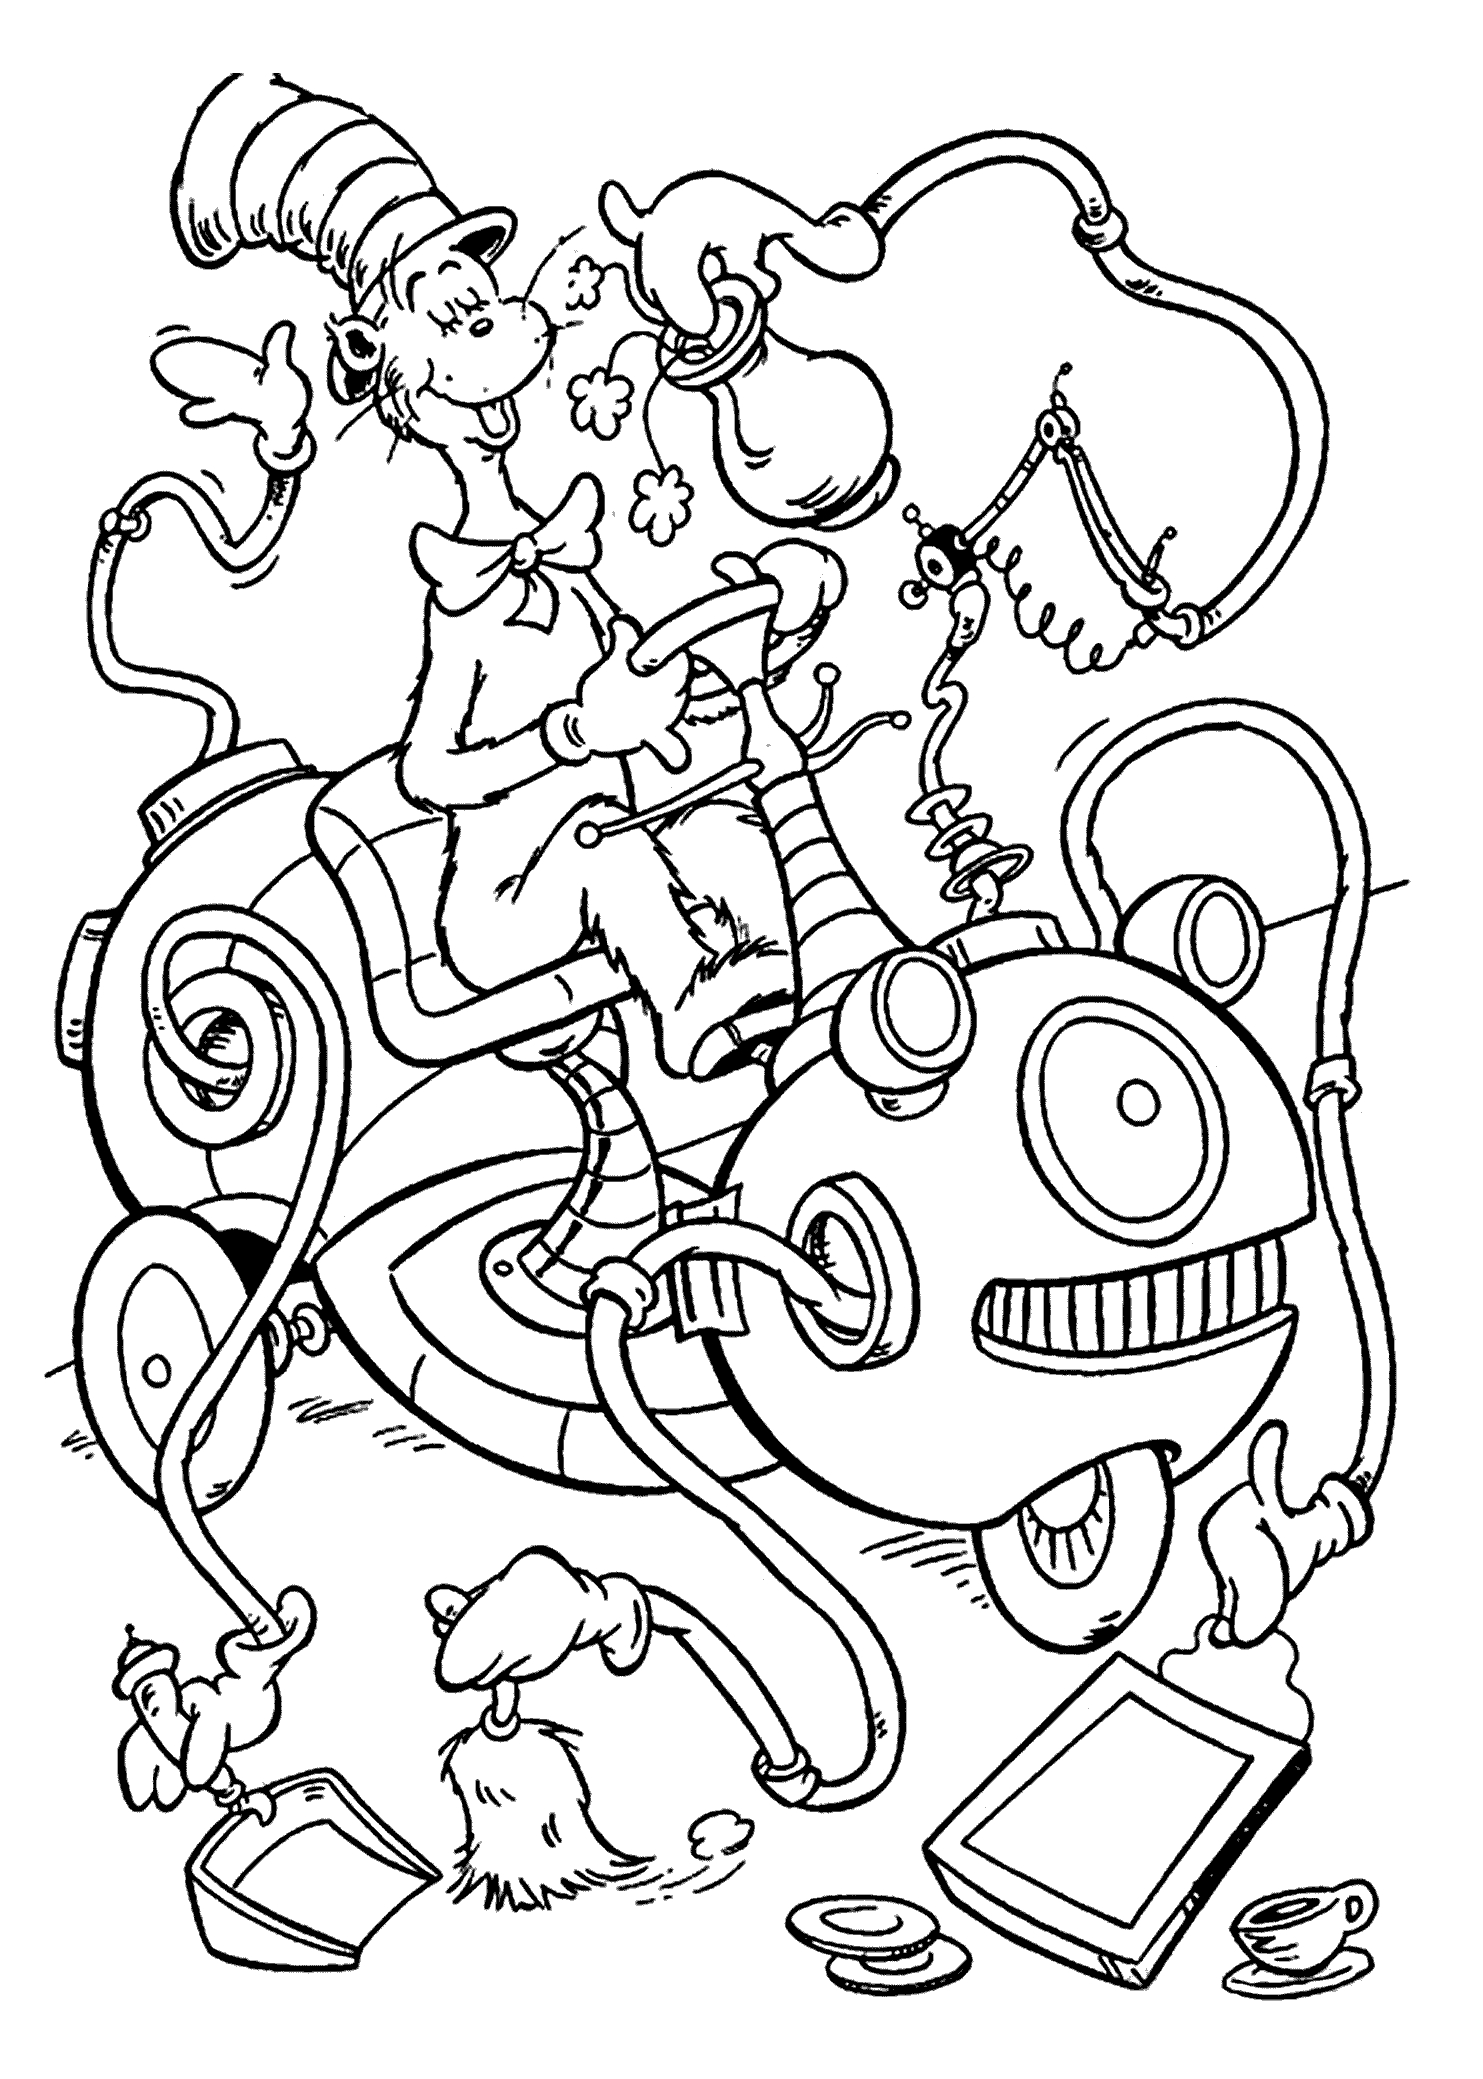 Cat In The Hat Coloring Page Coloring Design Dr Seuss Hat Printable Free Druss Coloring Pages